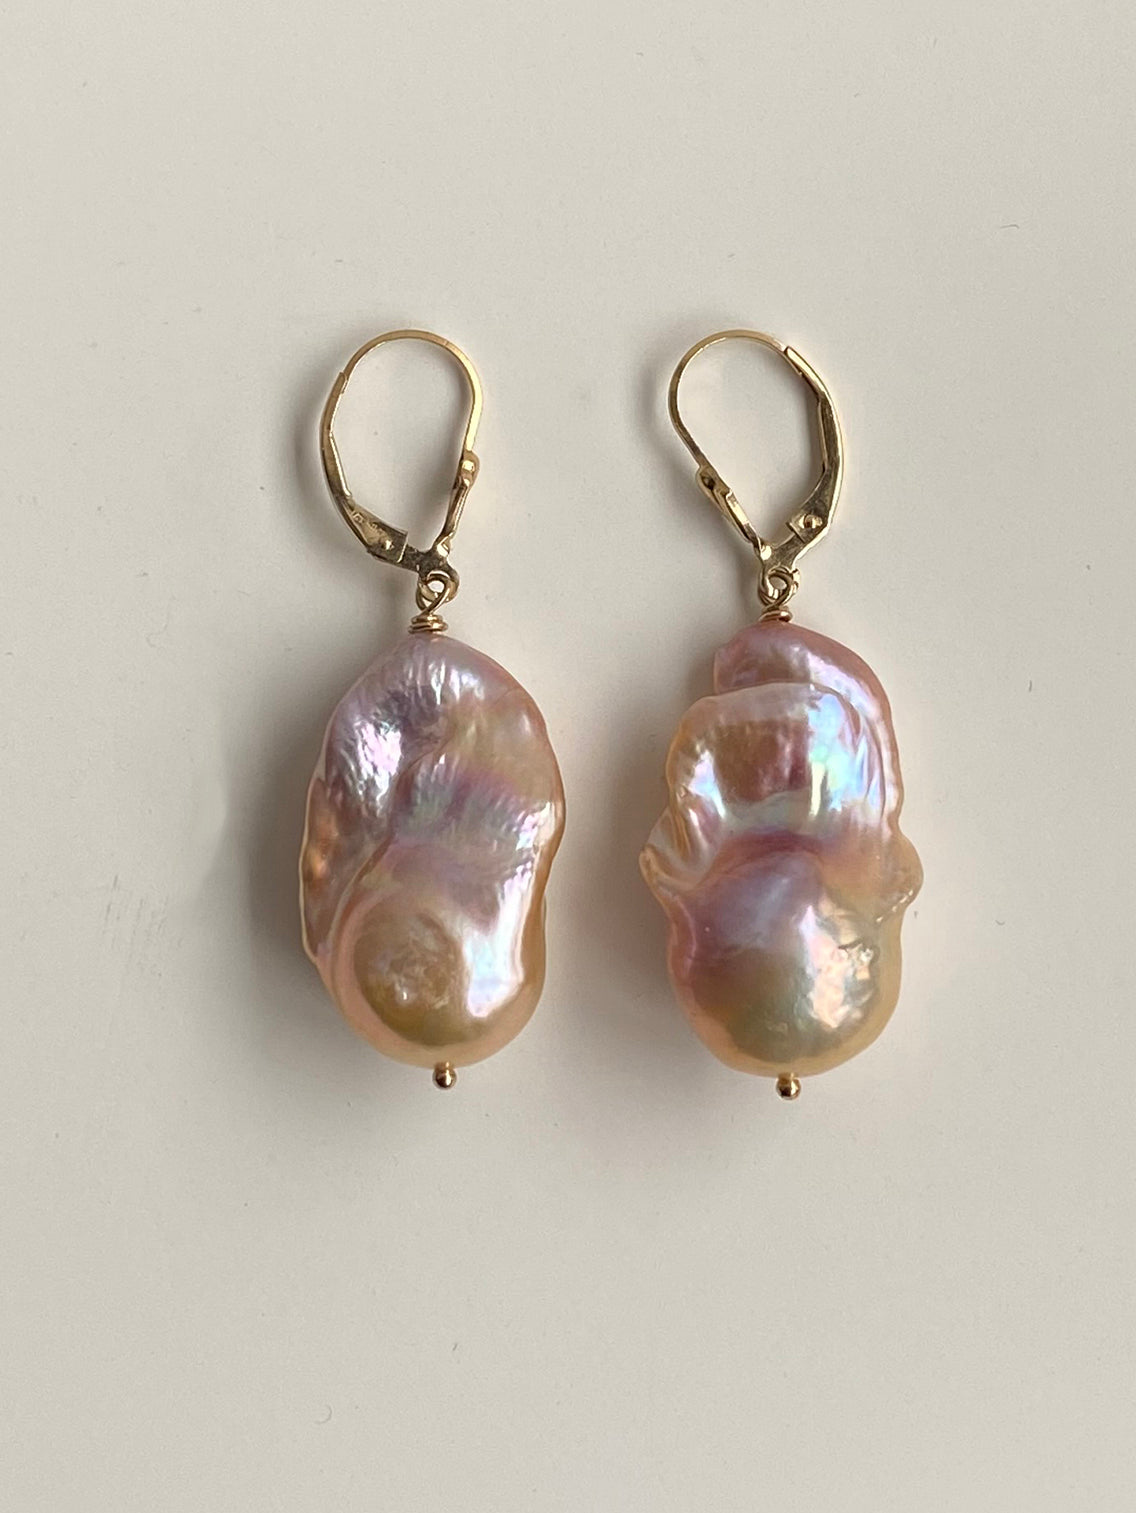 17-28mm Natural Color Peach Baroque Fireballs with Lavender Flash on 14k GF Ear Wires by Linda Queally